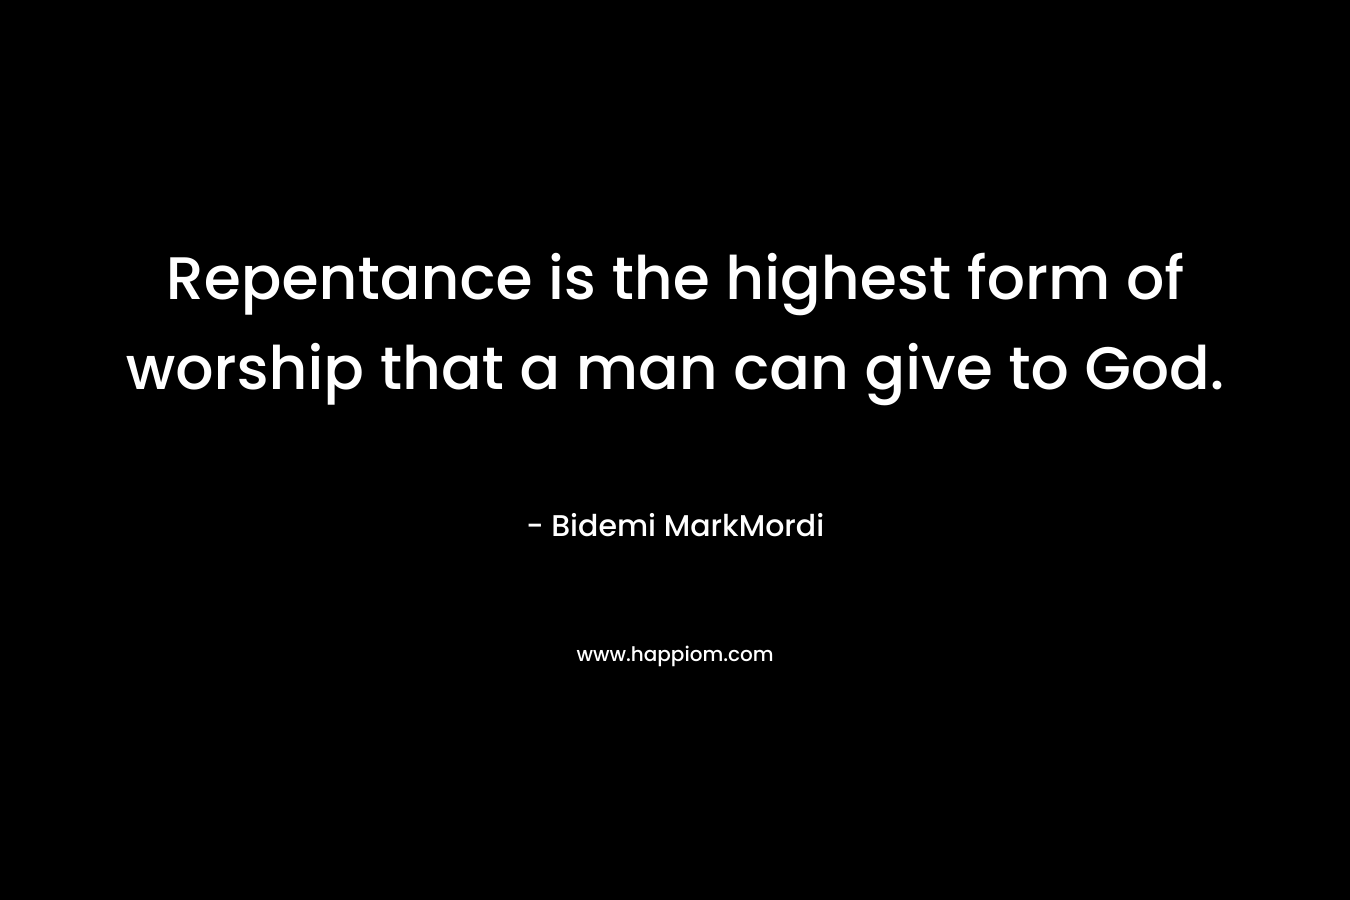 Repentance is the highest form of worship that a man can give to God.